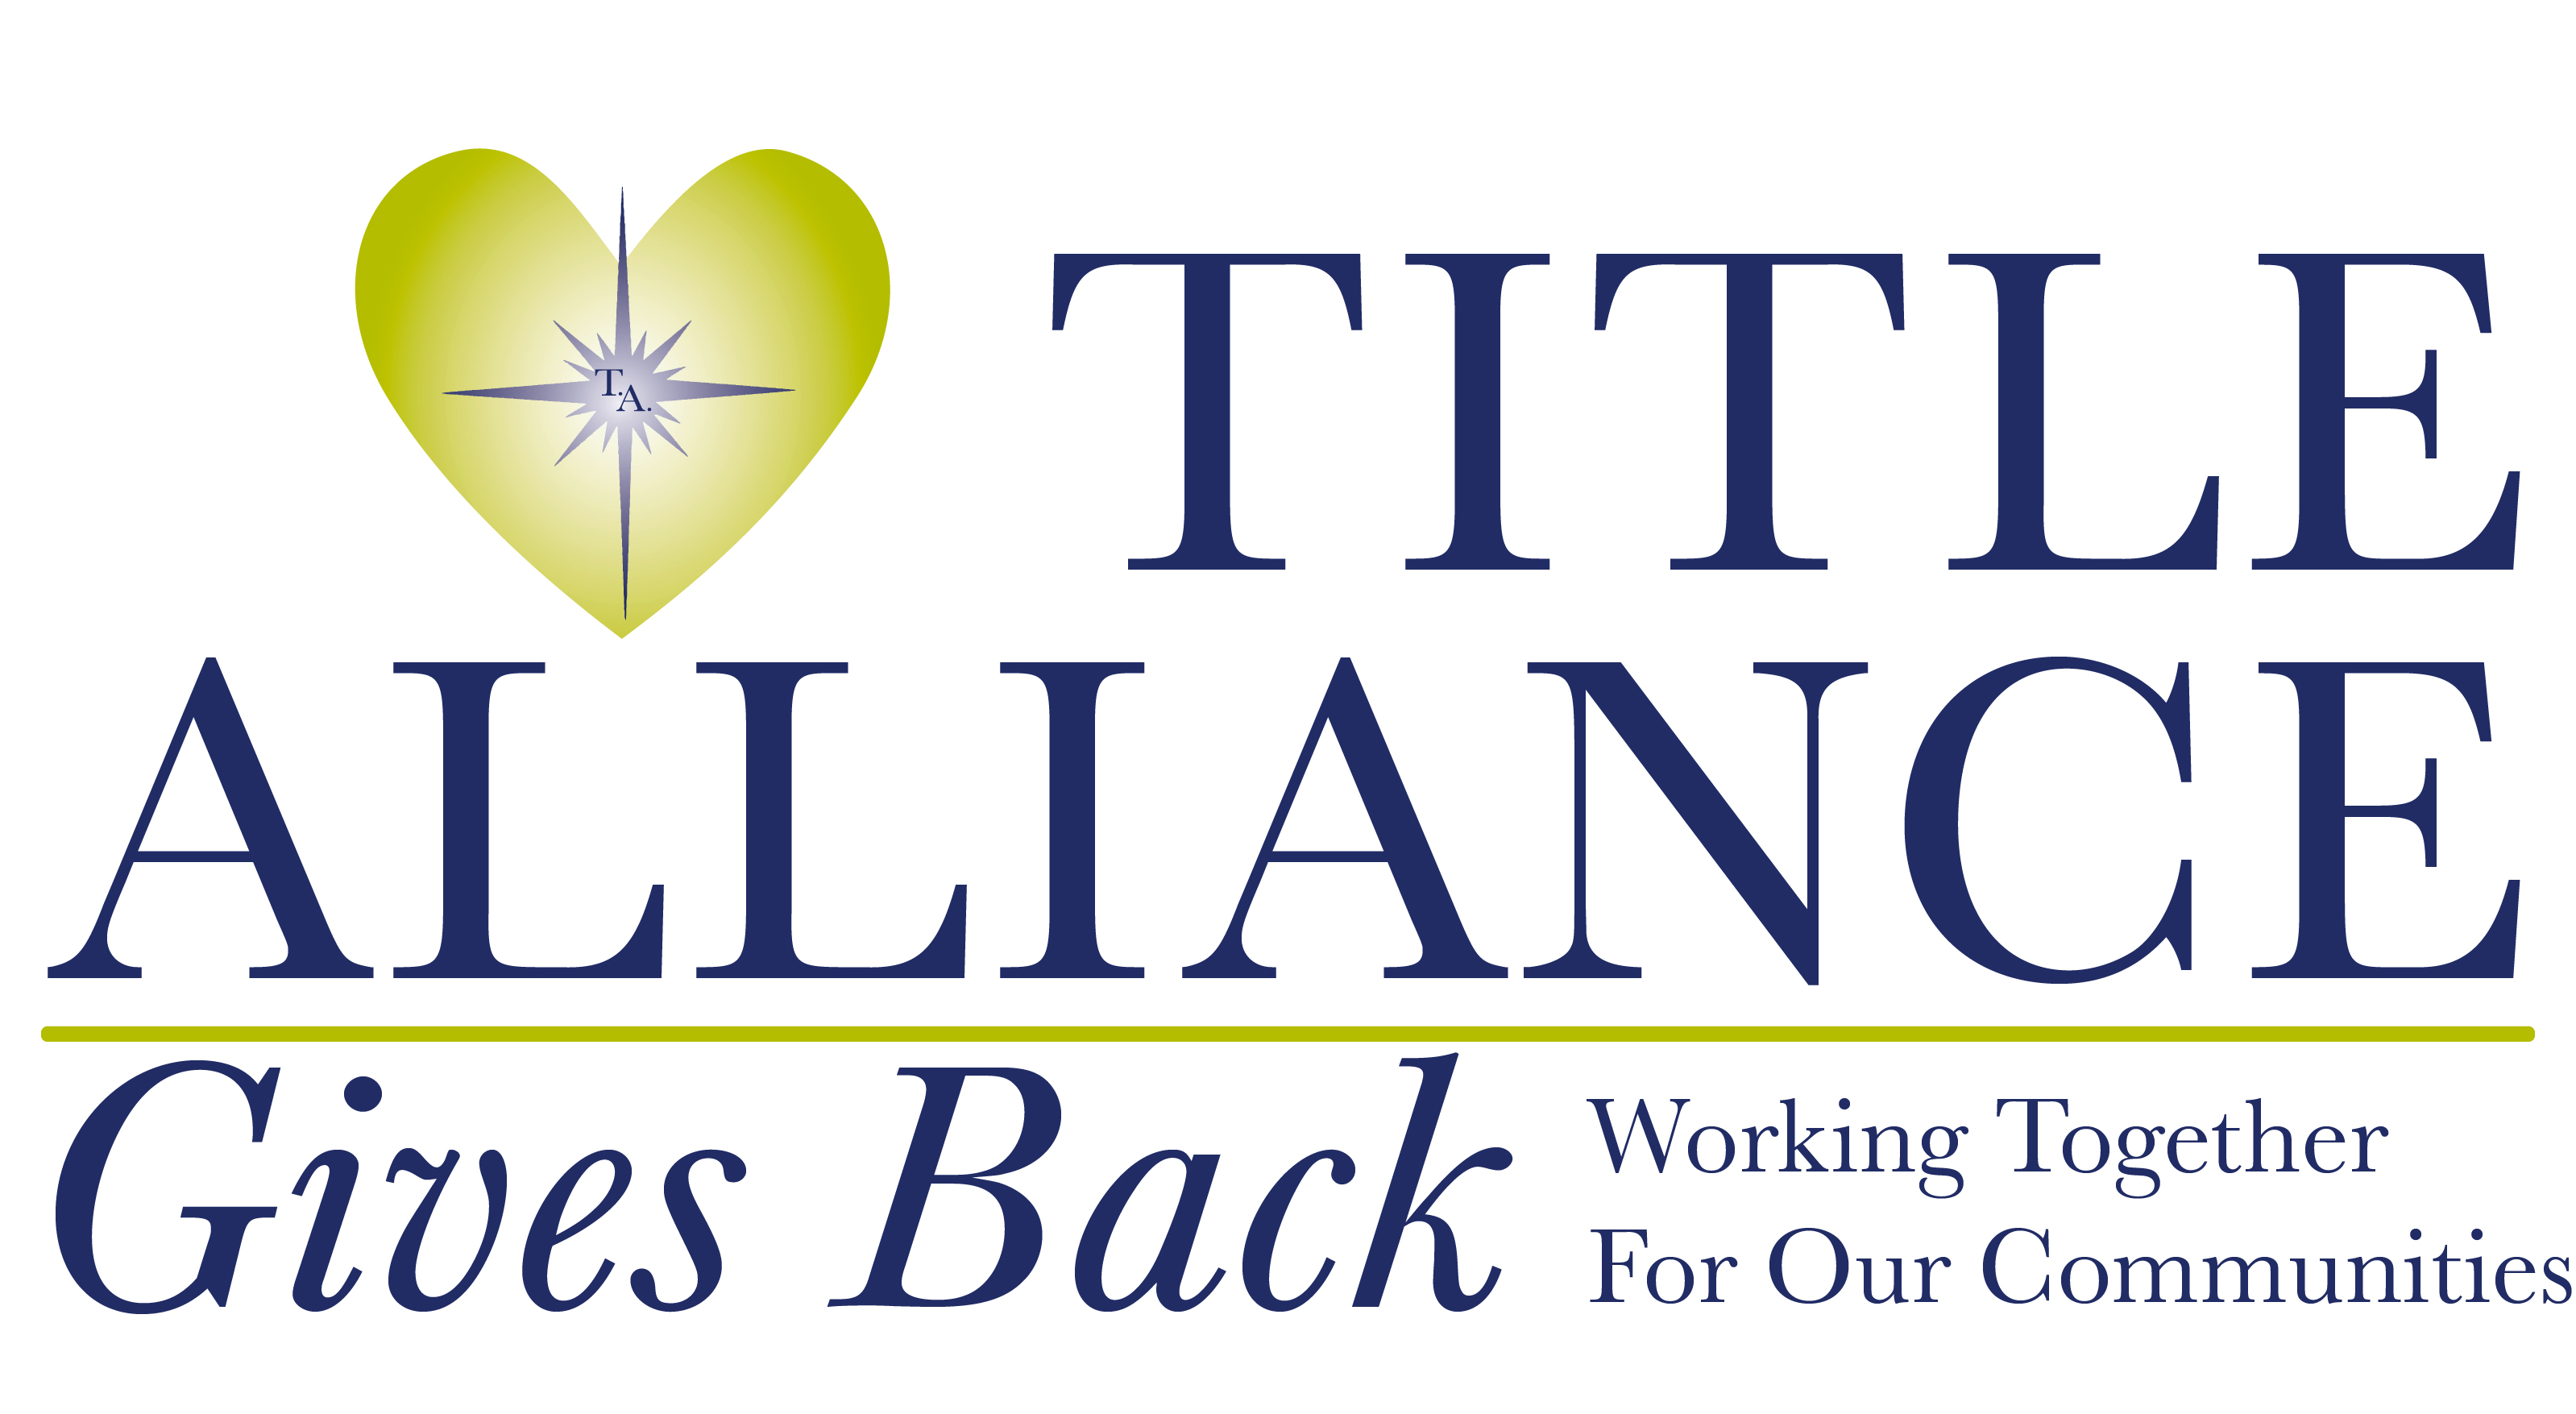 Title Alliance Ltd. held their second annual T.A. Gives Back Week, from April 8-12, where more than 250 employees across 54 offices in 10 states gave back to their local communities by volunteering their time during paid, work hours